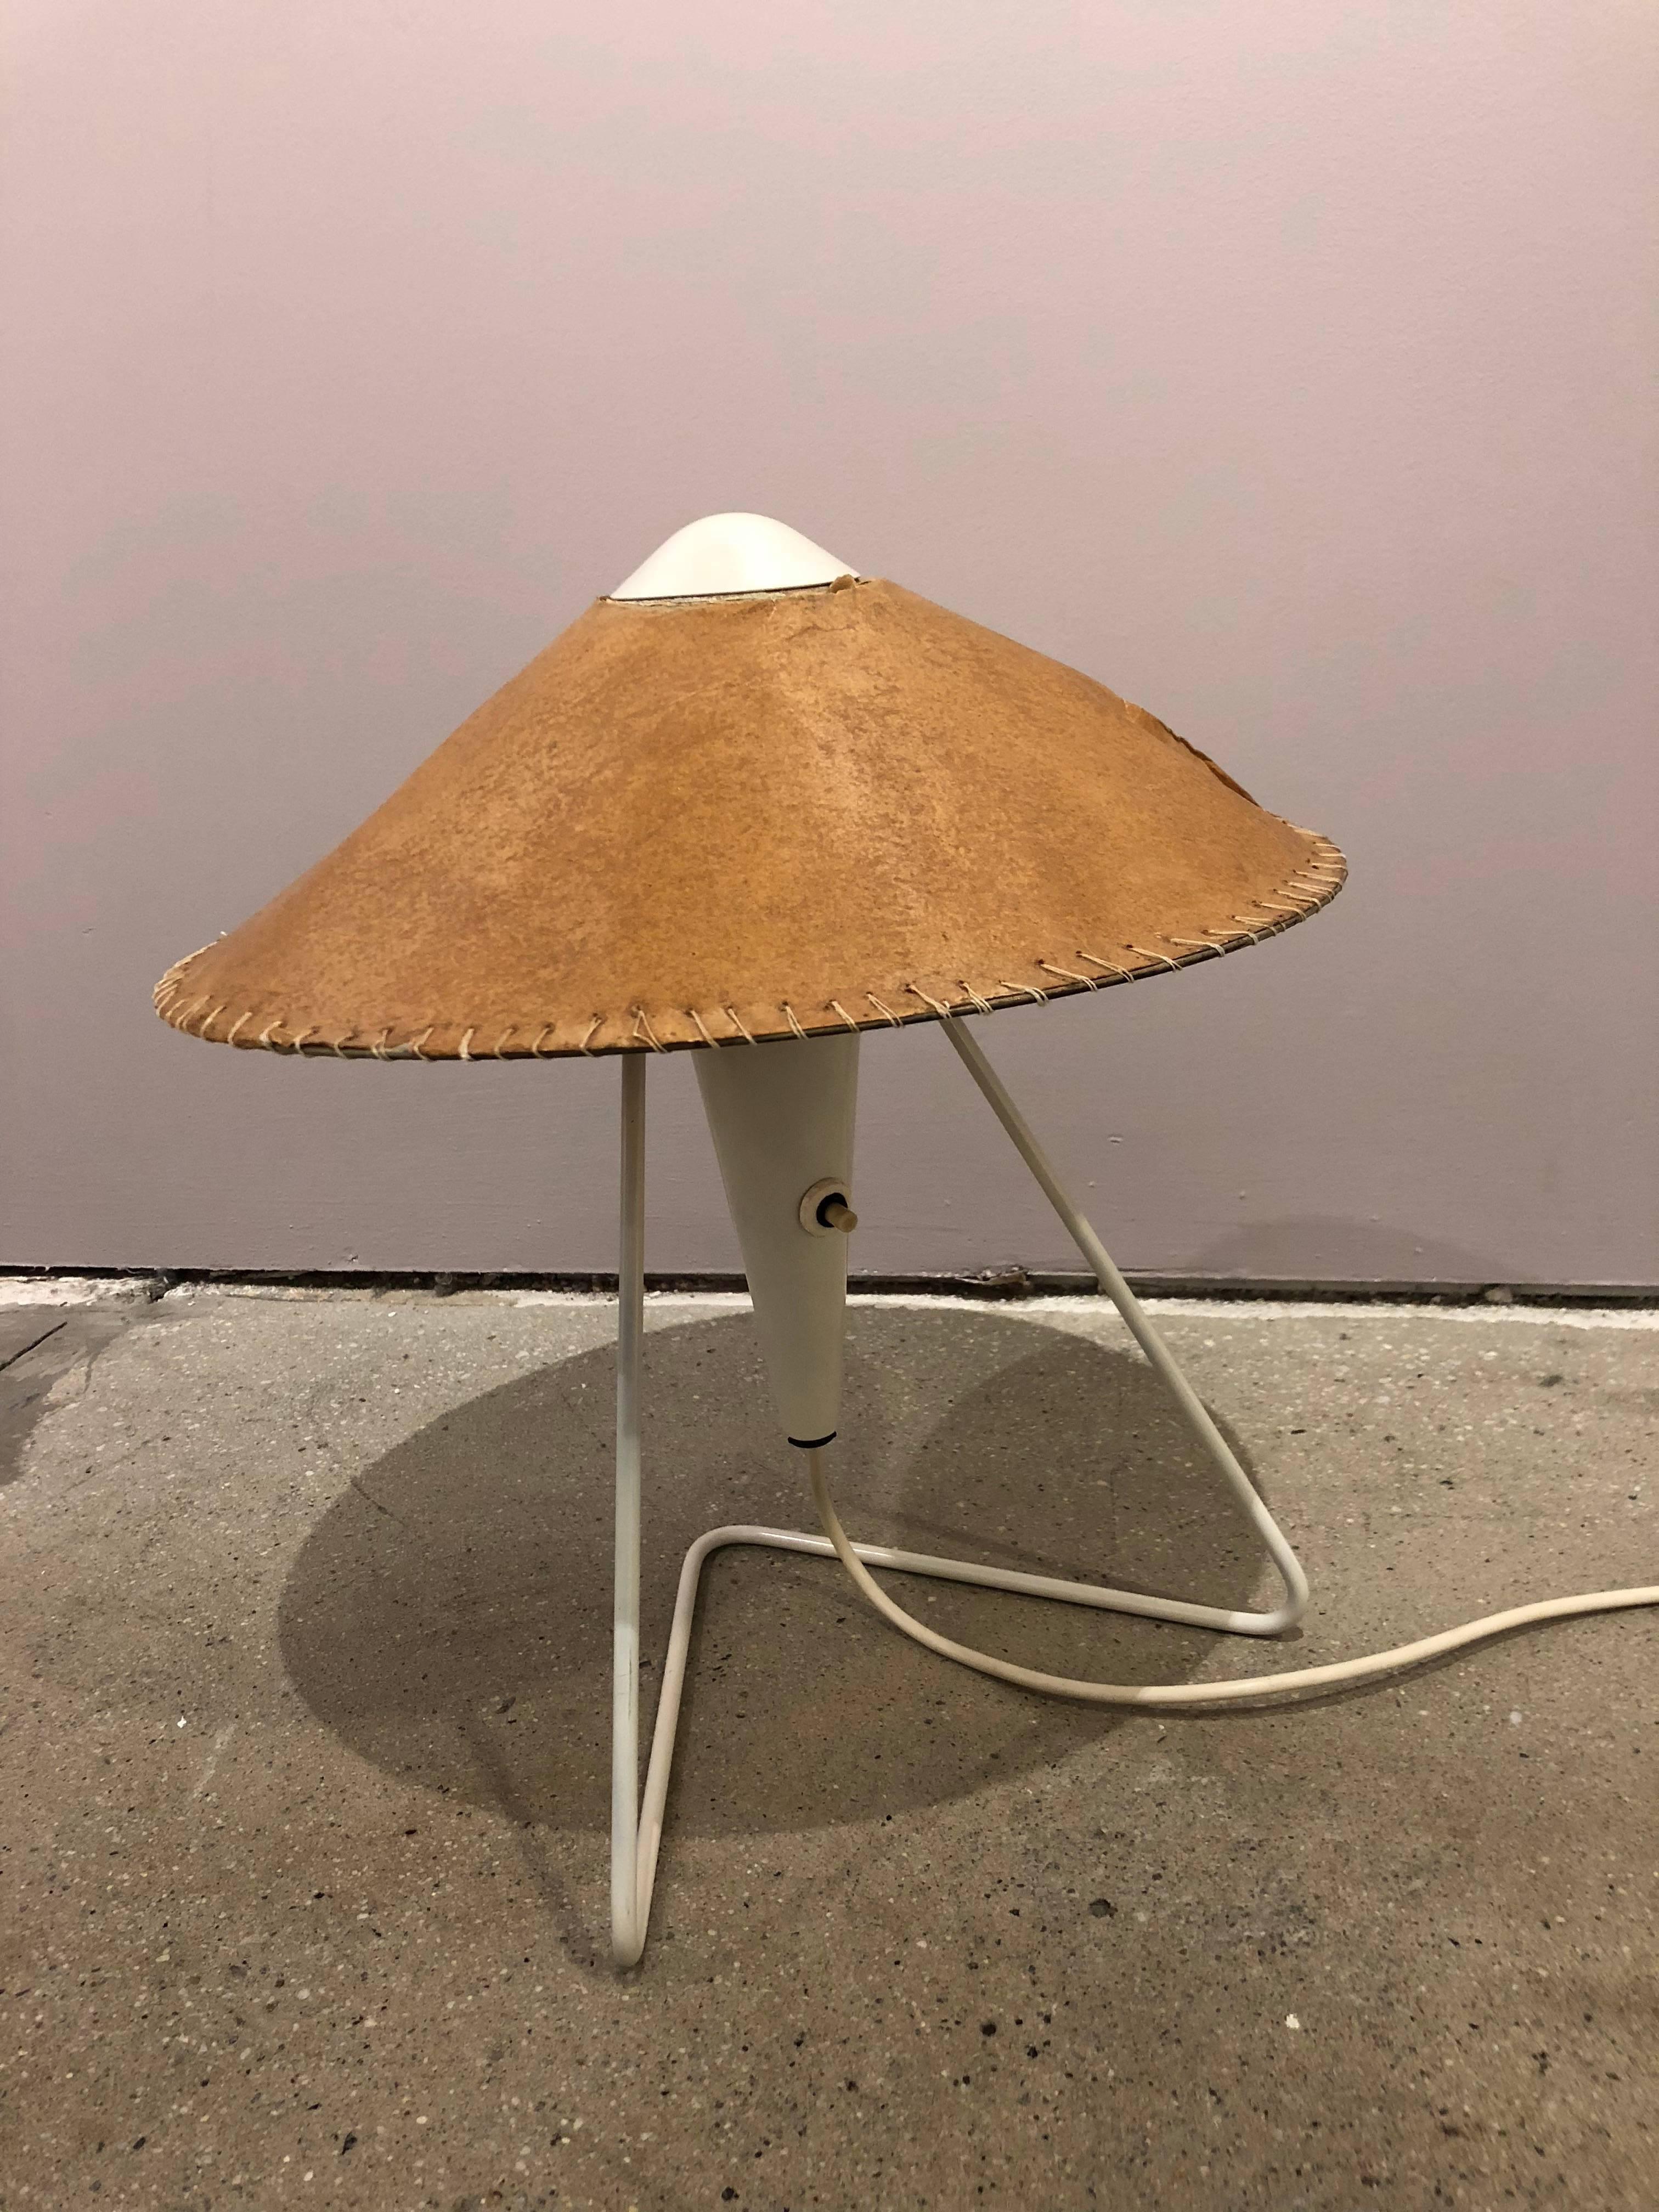 Table lamp with metal frame and parchment shade. Designed by Helena Frantová. The lamp is in good original condition. Shade has definite wear.